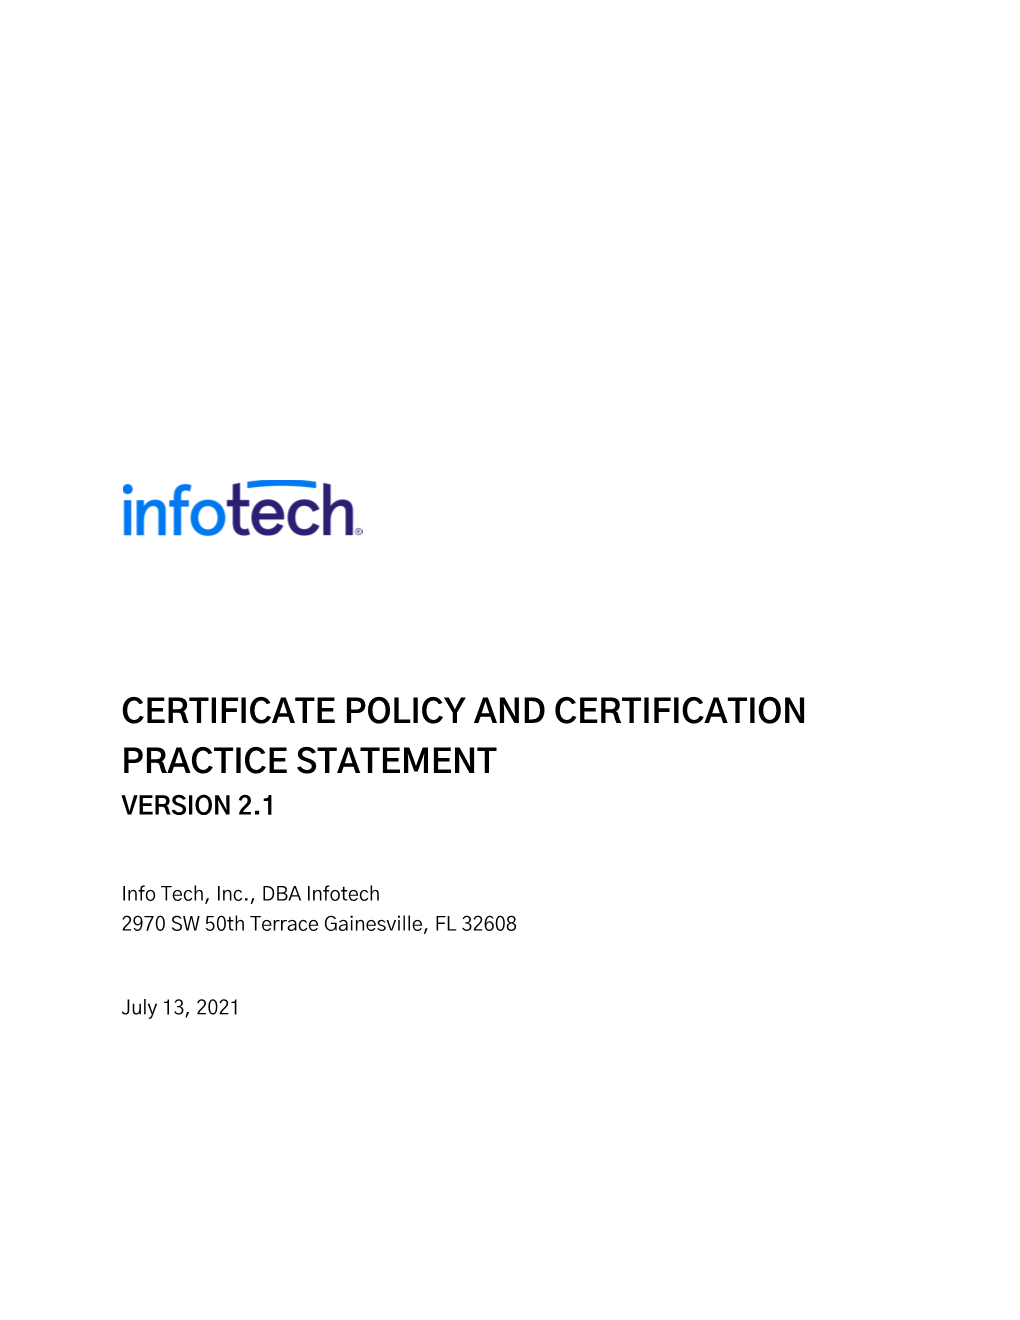 Certificate Policy and Certification Practice Statement Version 2.1